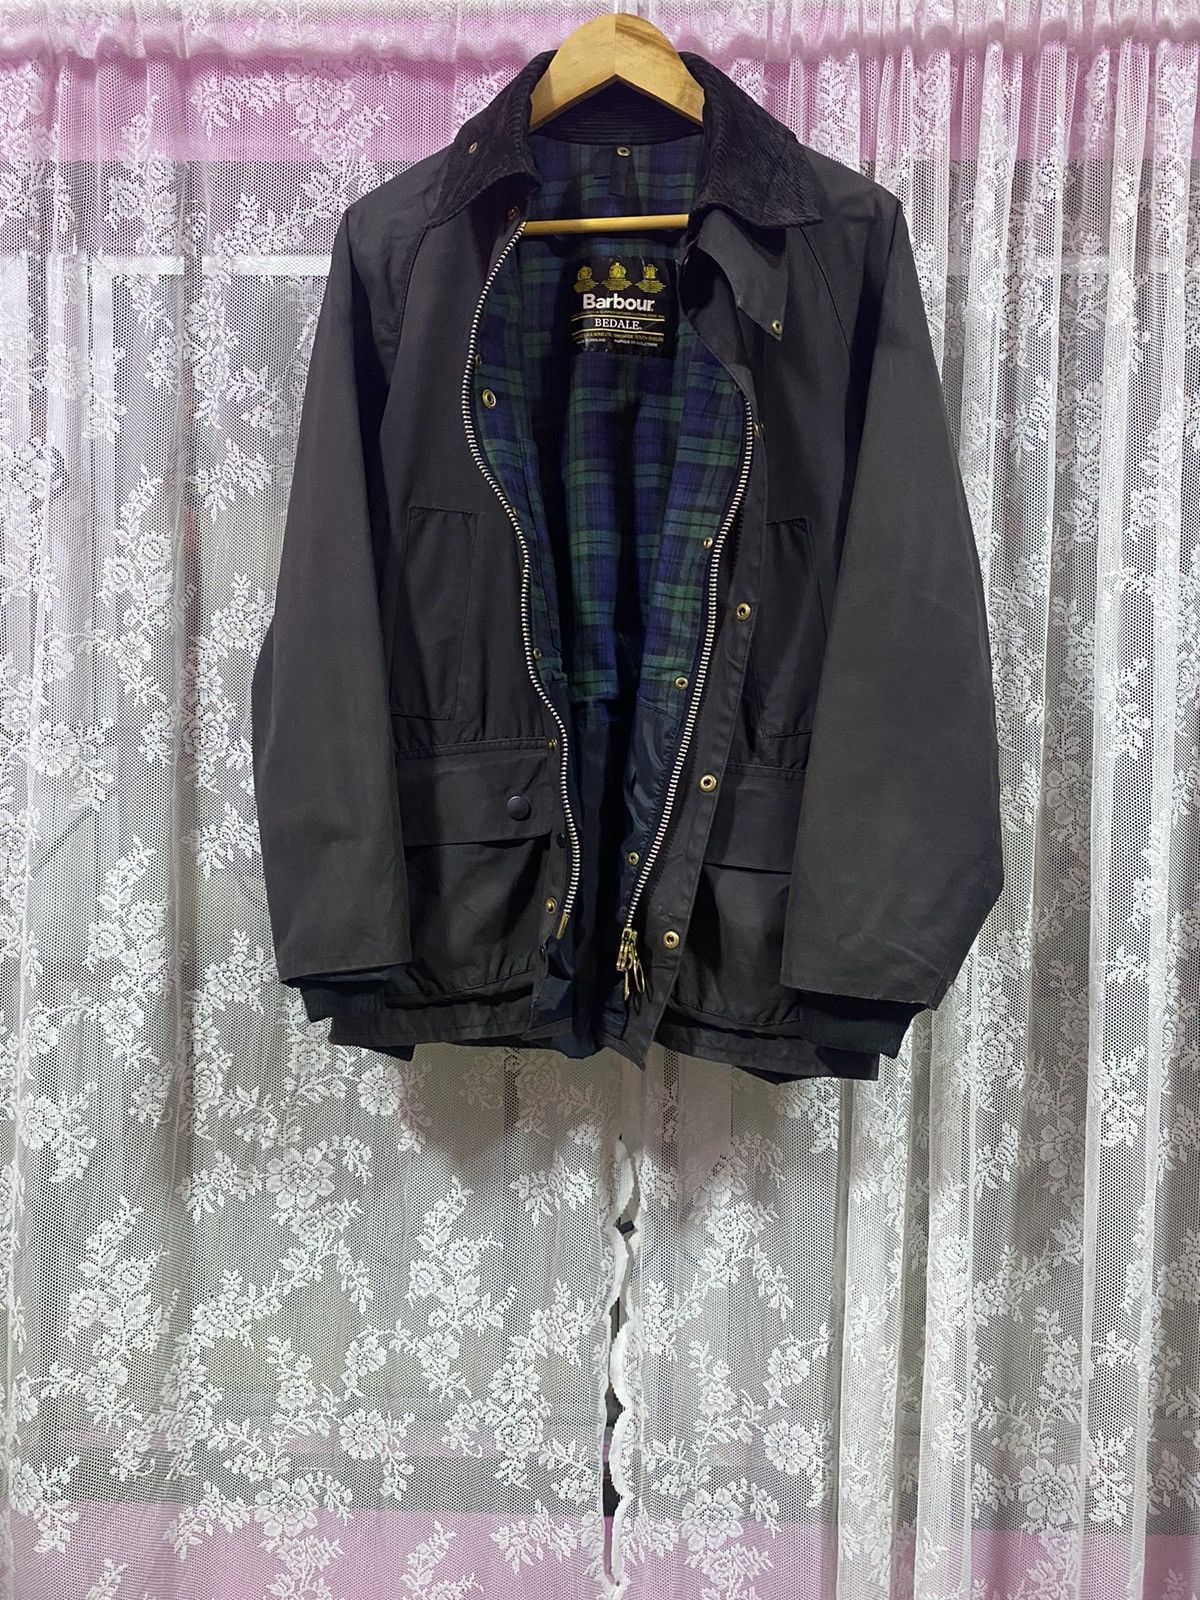 Barbour Bedale Waxed Jacket Made England - 3